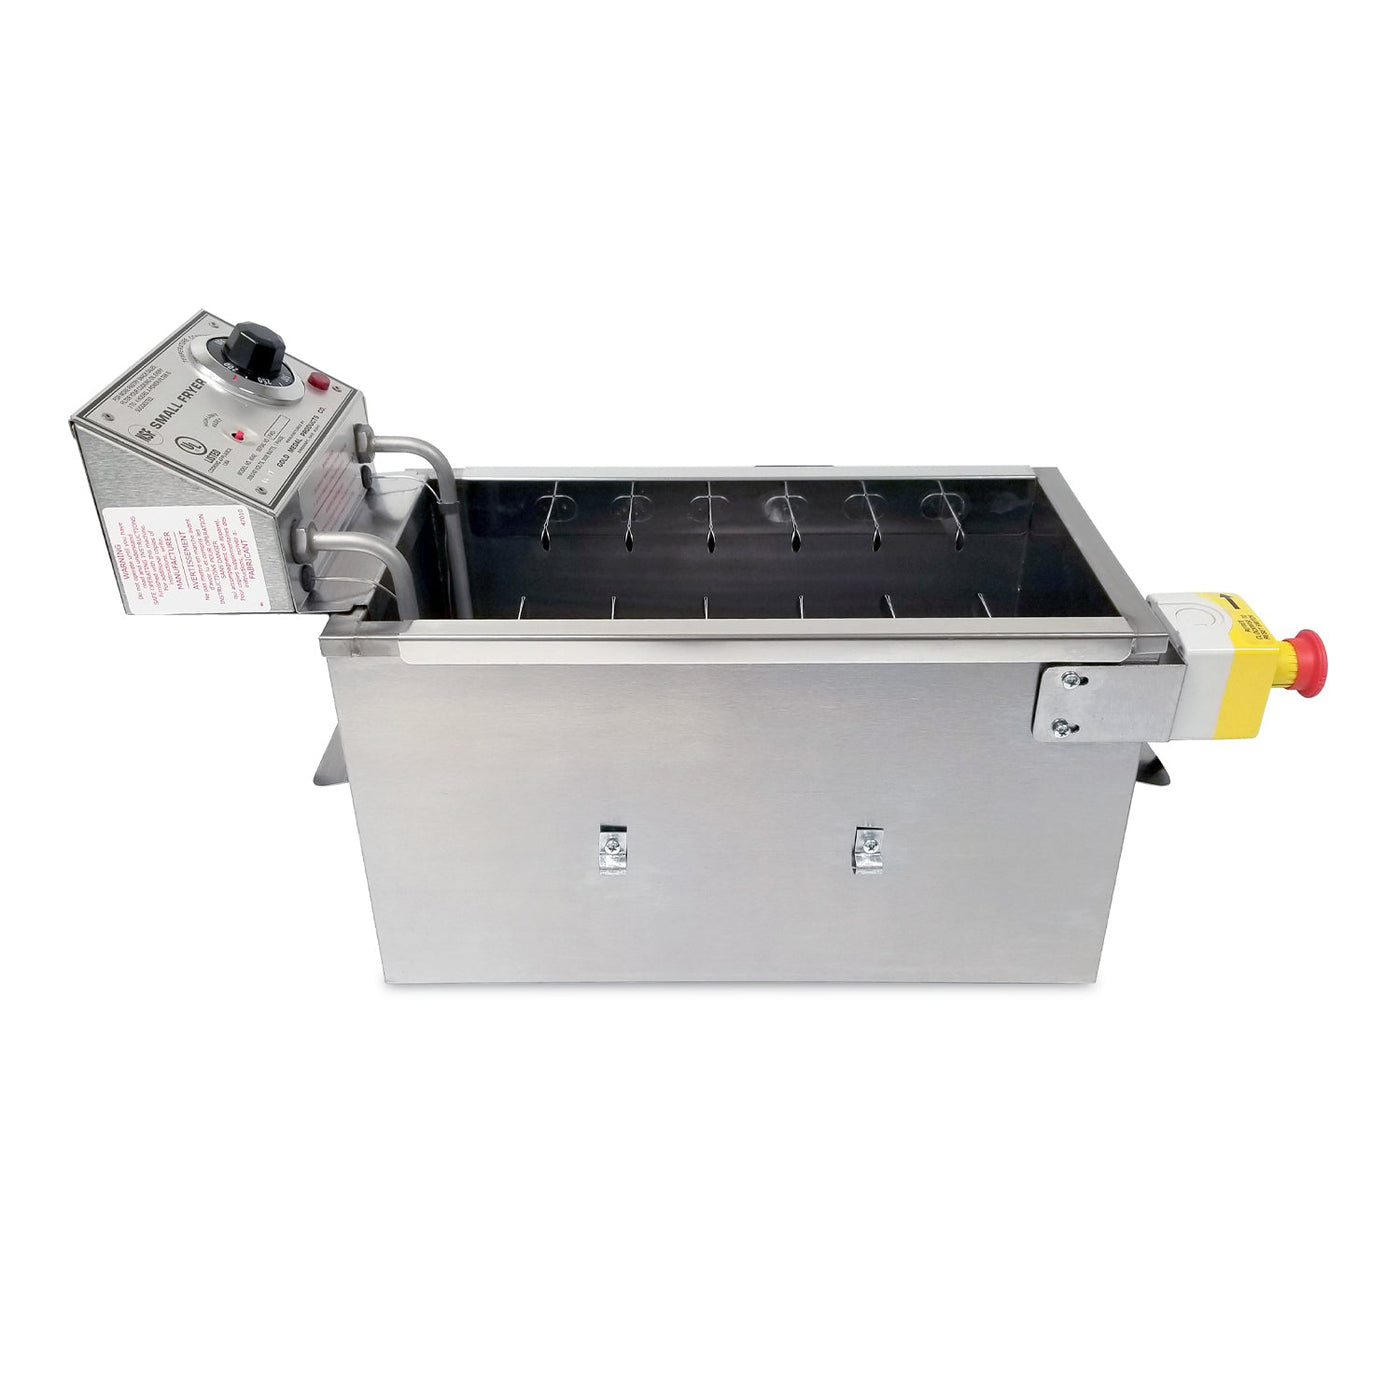 Corn Dog Fryer  Small Fryer - Gold Medal #8048D – Gold Medal Products Co.